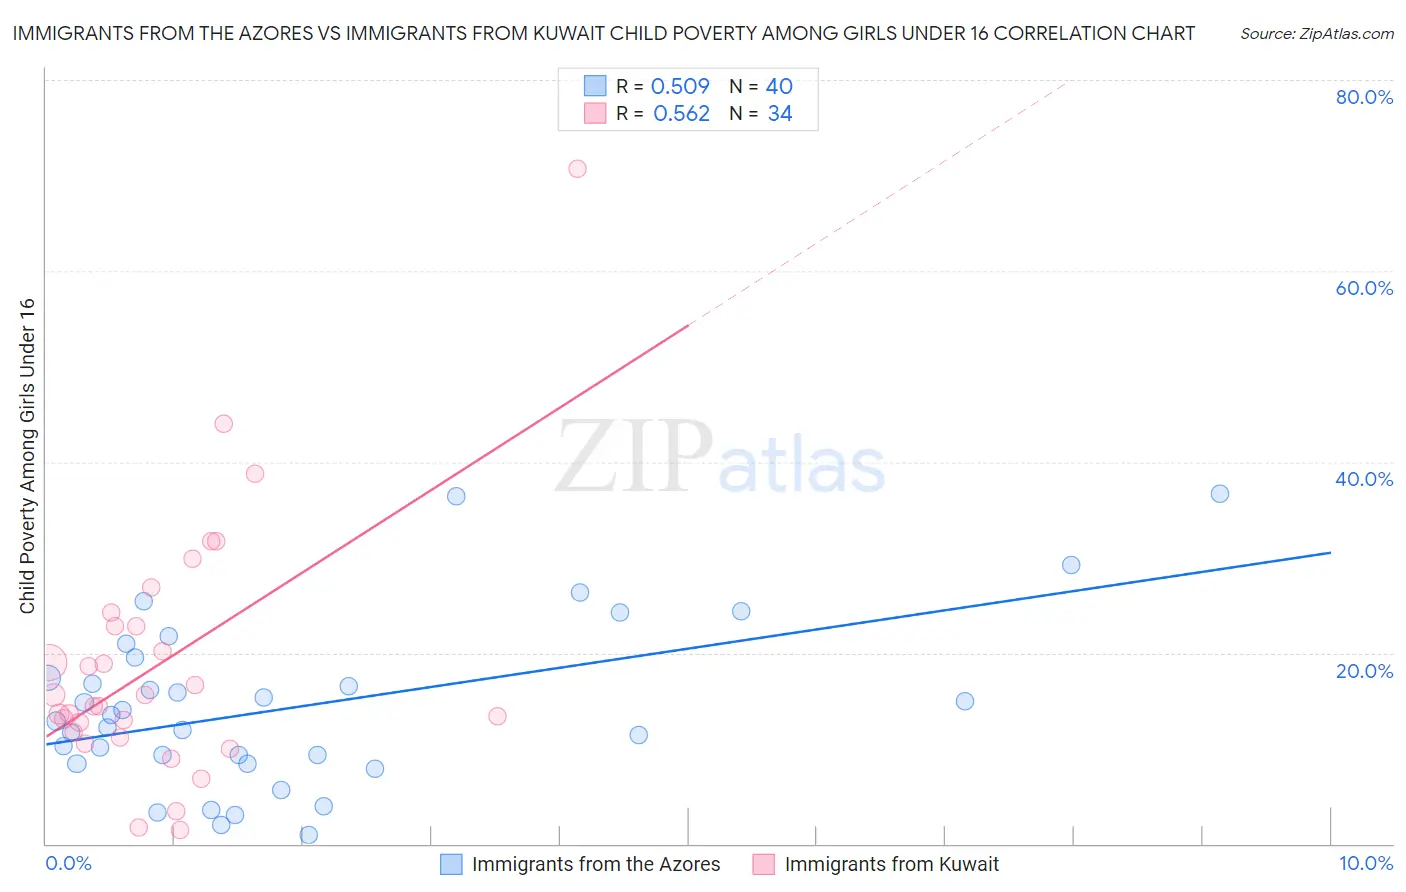 Immigrants from the Azores vs Immigrants from Kuwait Child Poverty Among Girls Under 16